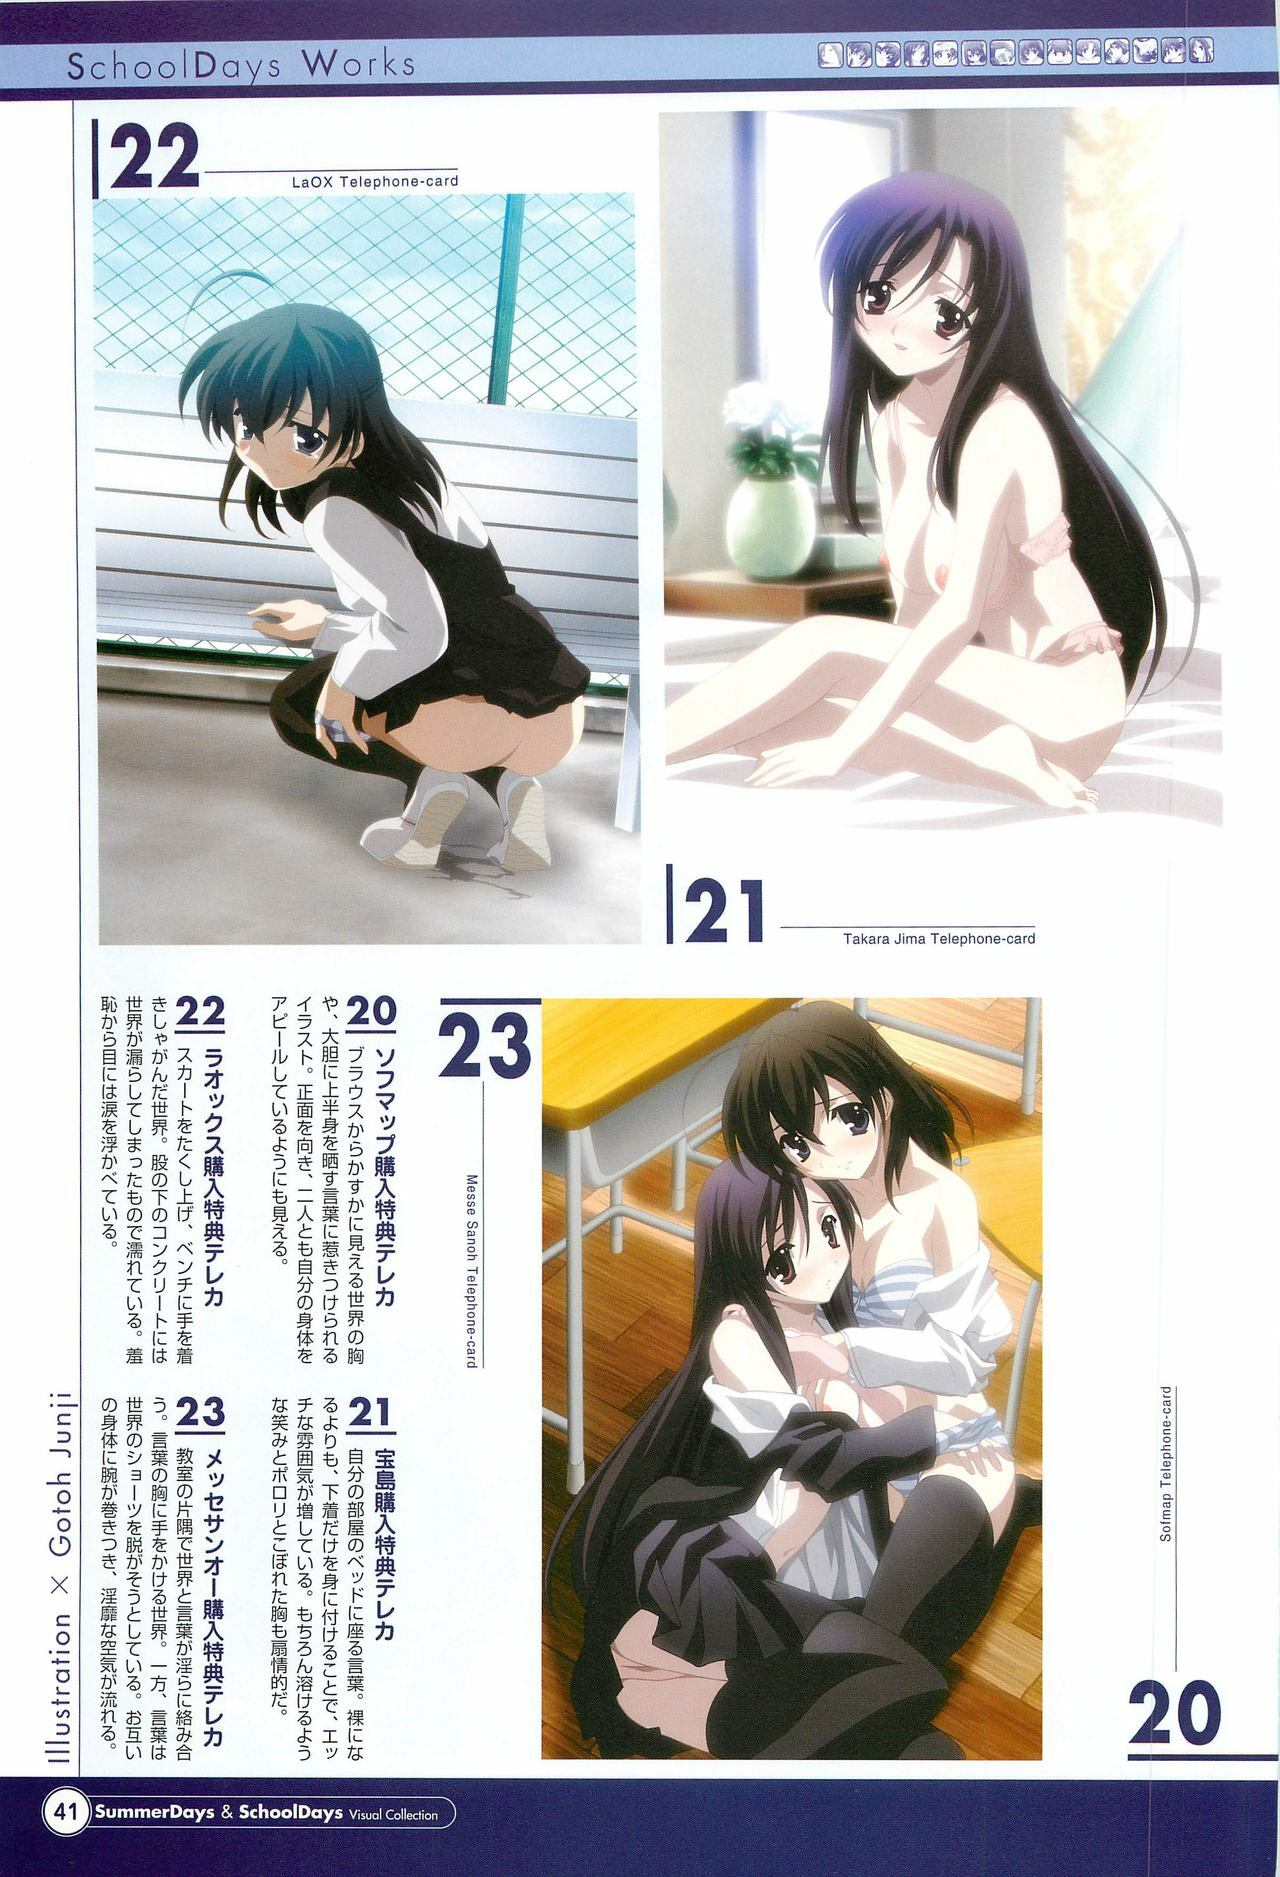 SummerDays & School Days Visual Collection page 43 full